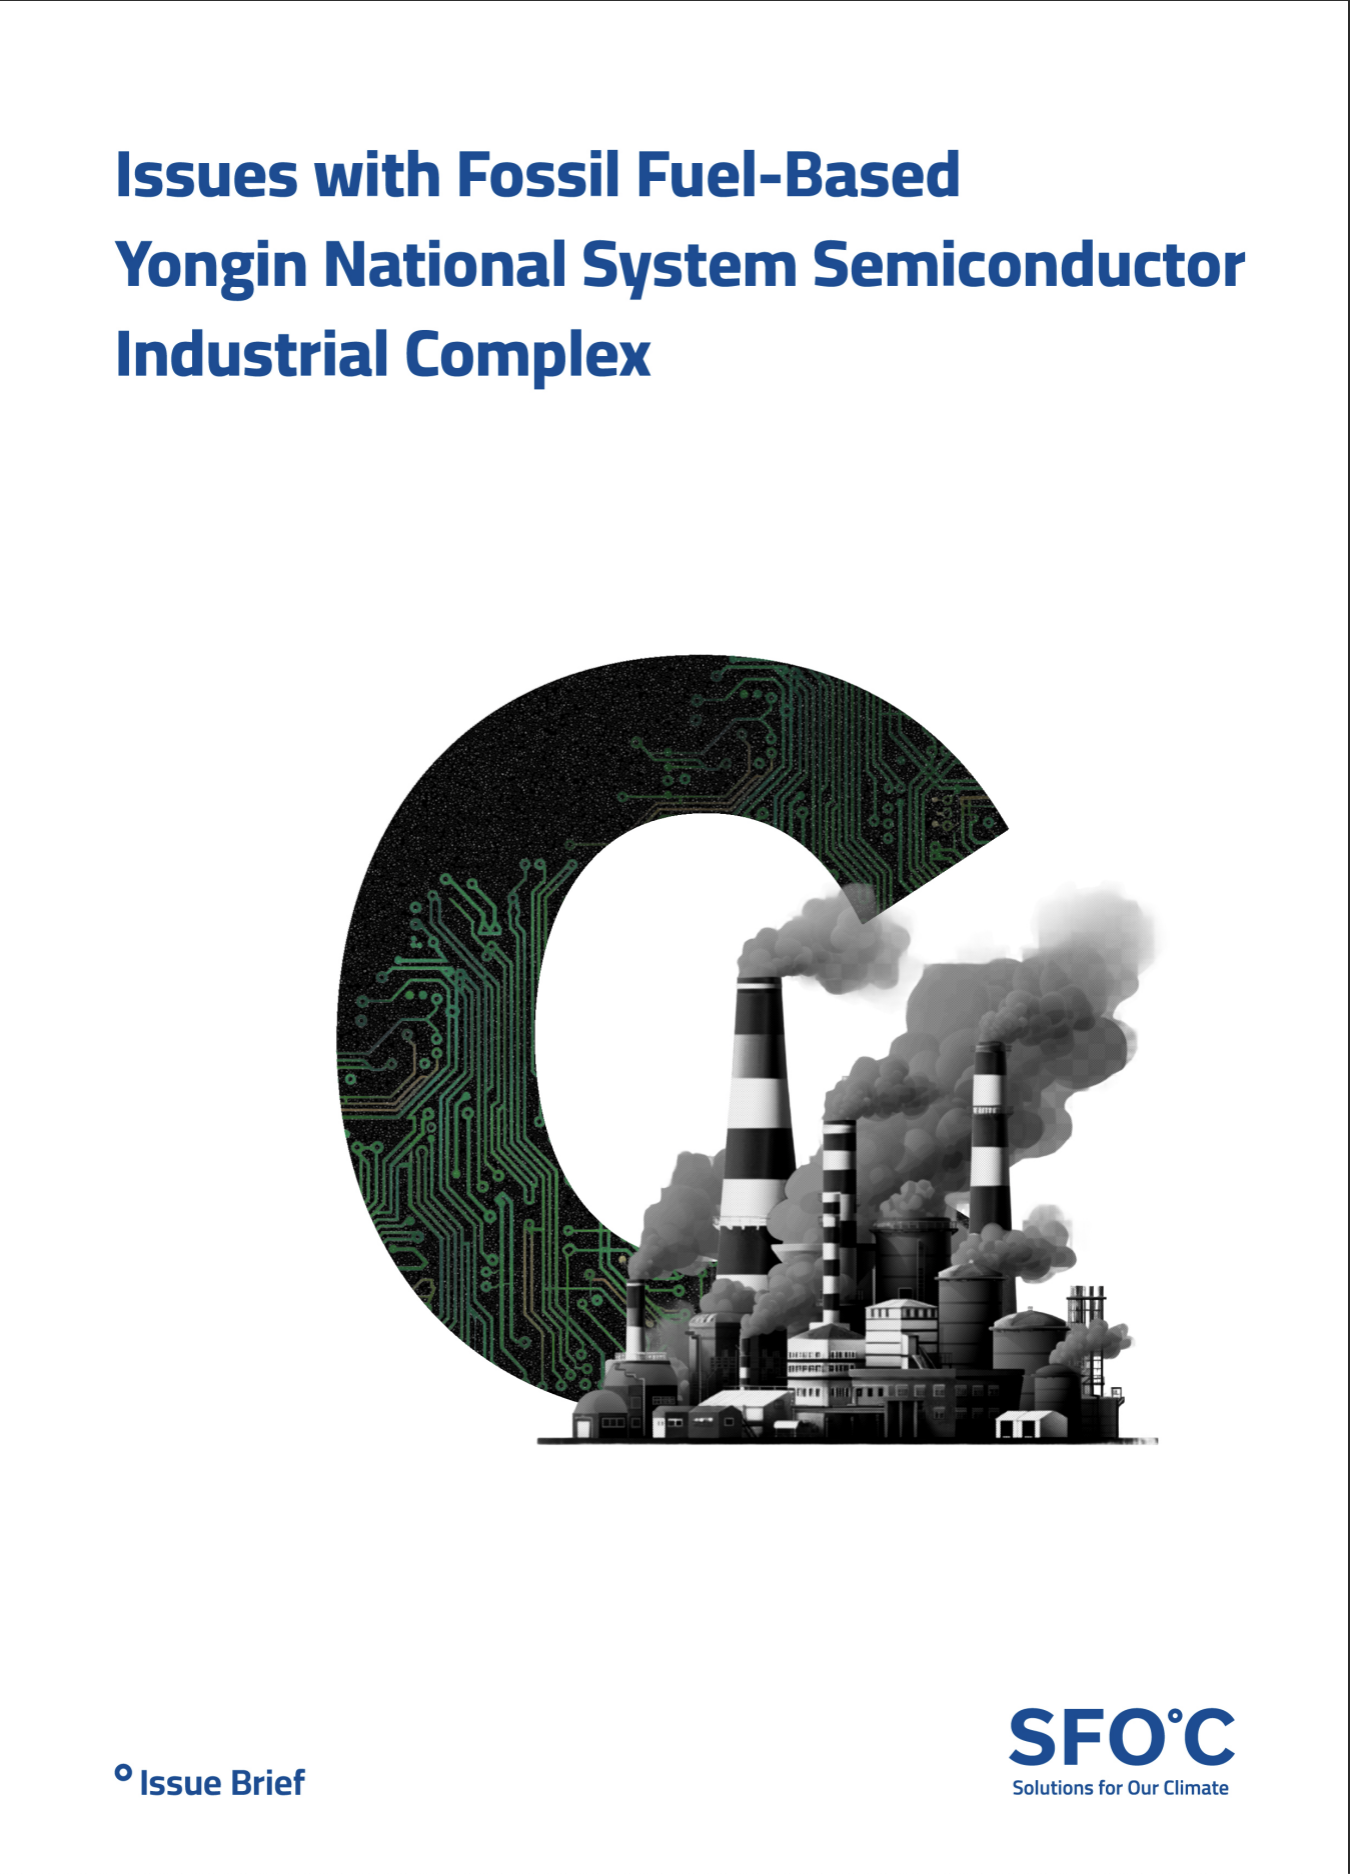 Issues with Fossil Fuel-Based Yongin National System Semiconductor Industrial Complex